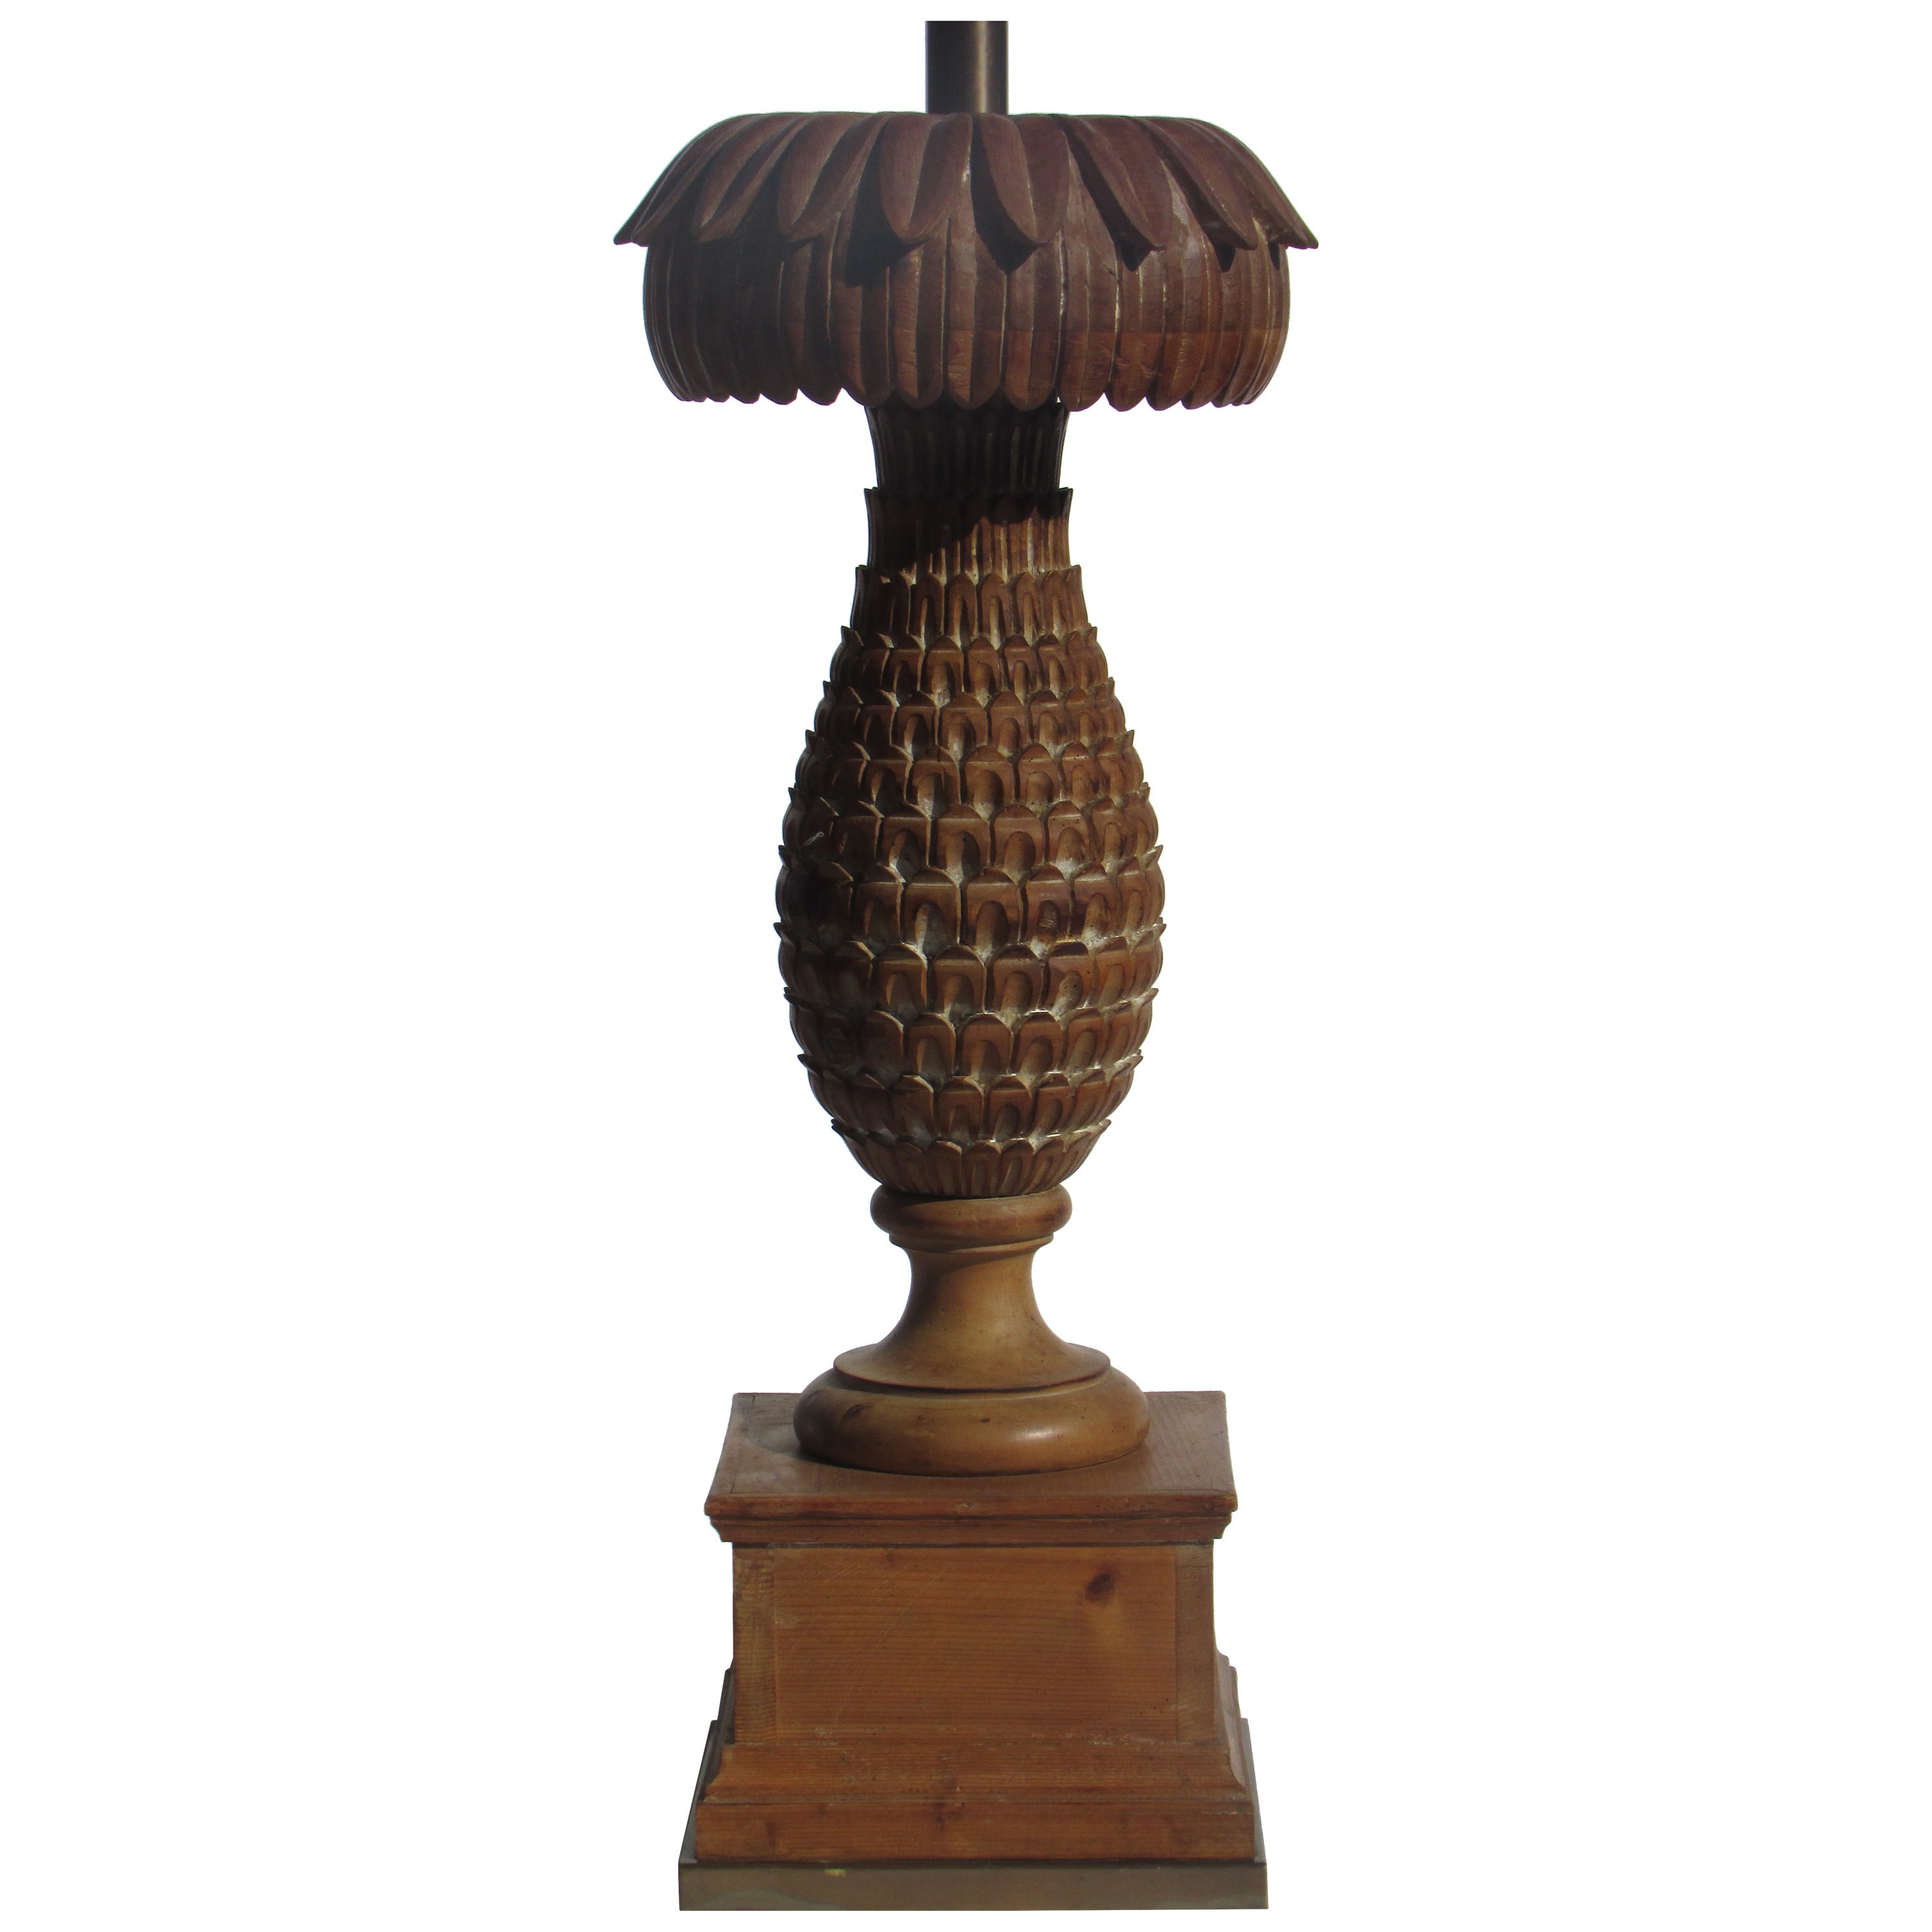  Oversize Carved Wood Pineapple Lamp by Marbro